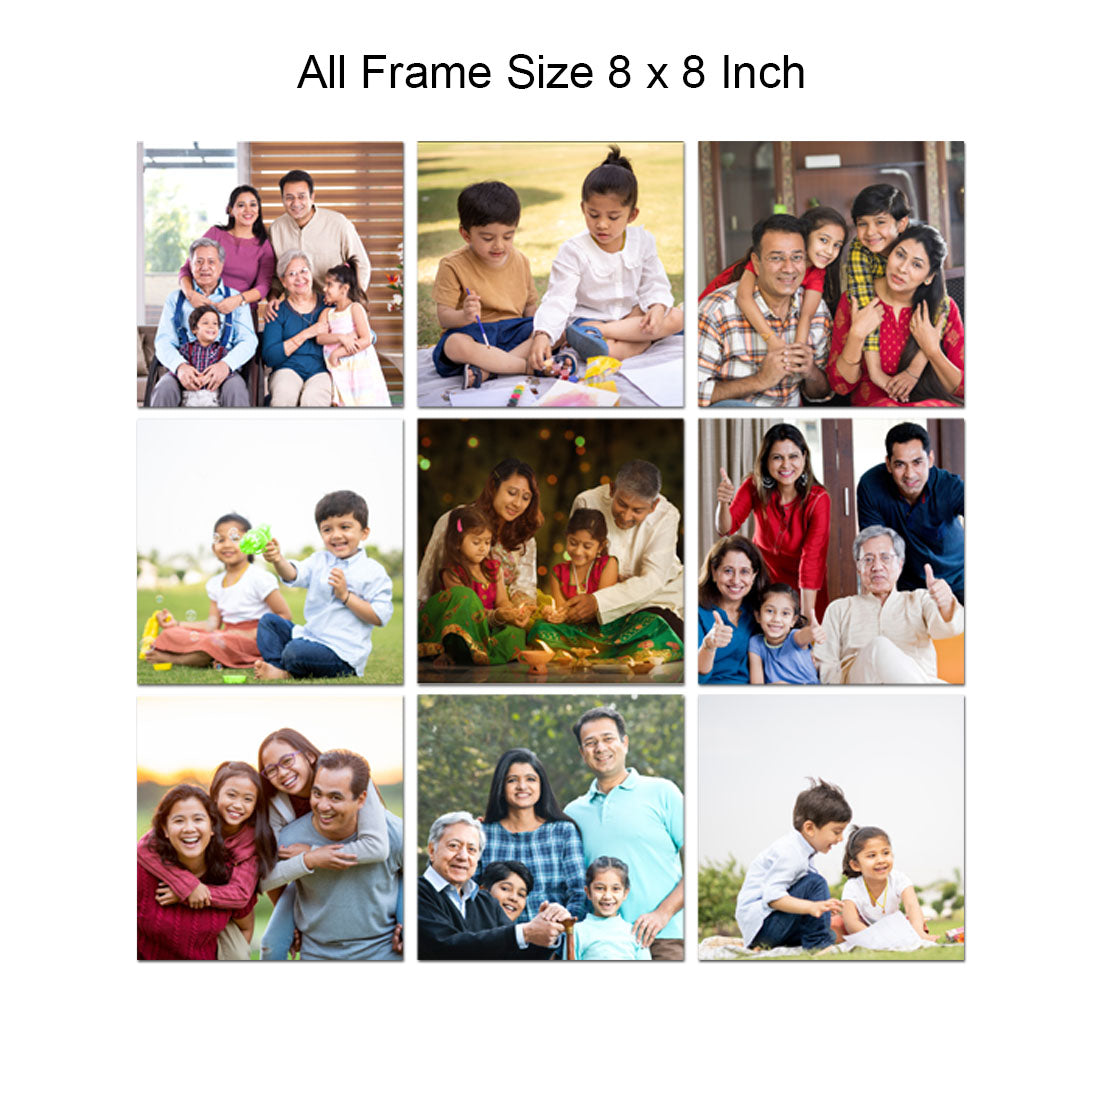 Acrylic Photo Frames Collage Prints for Home